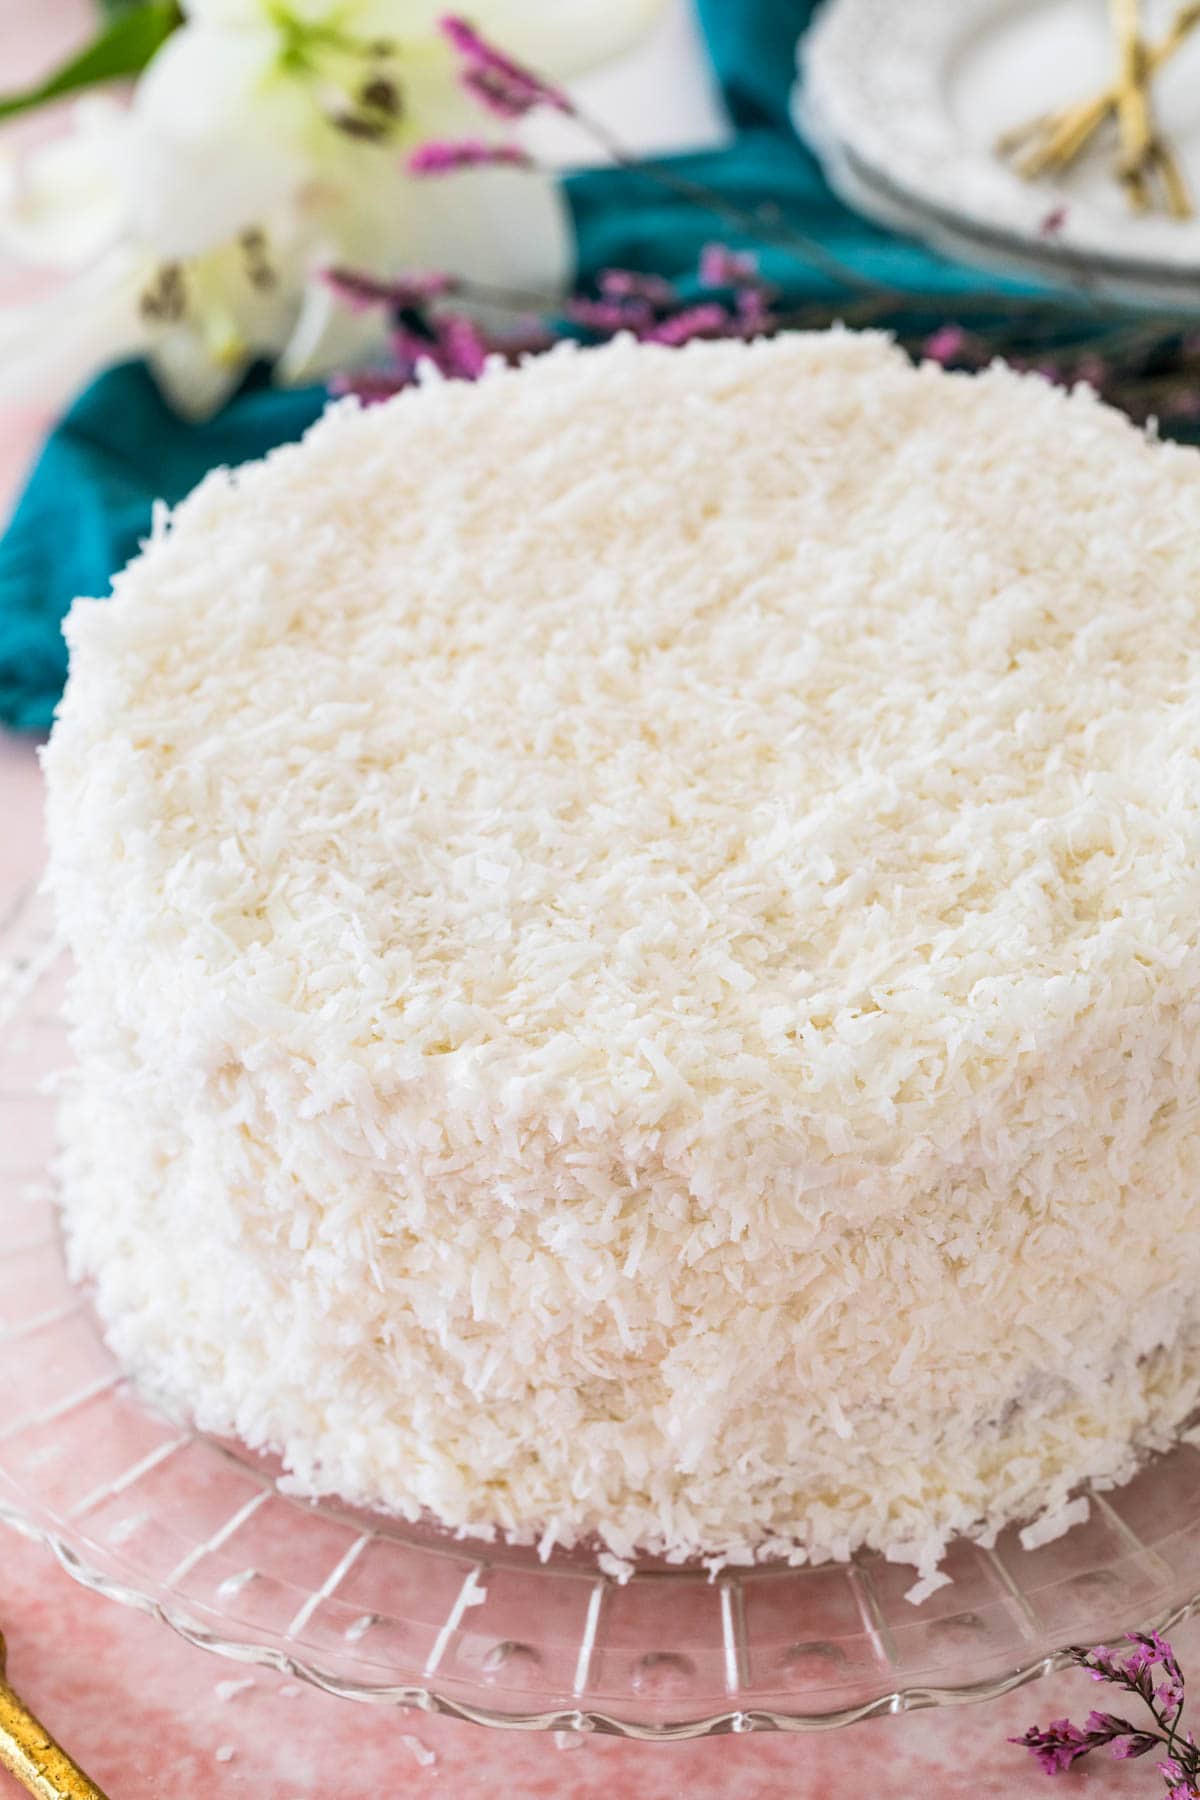 Coconut cake on glass platter, covered with shredded coconut